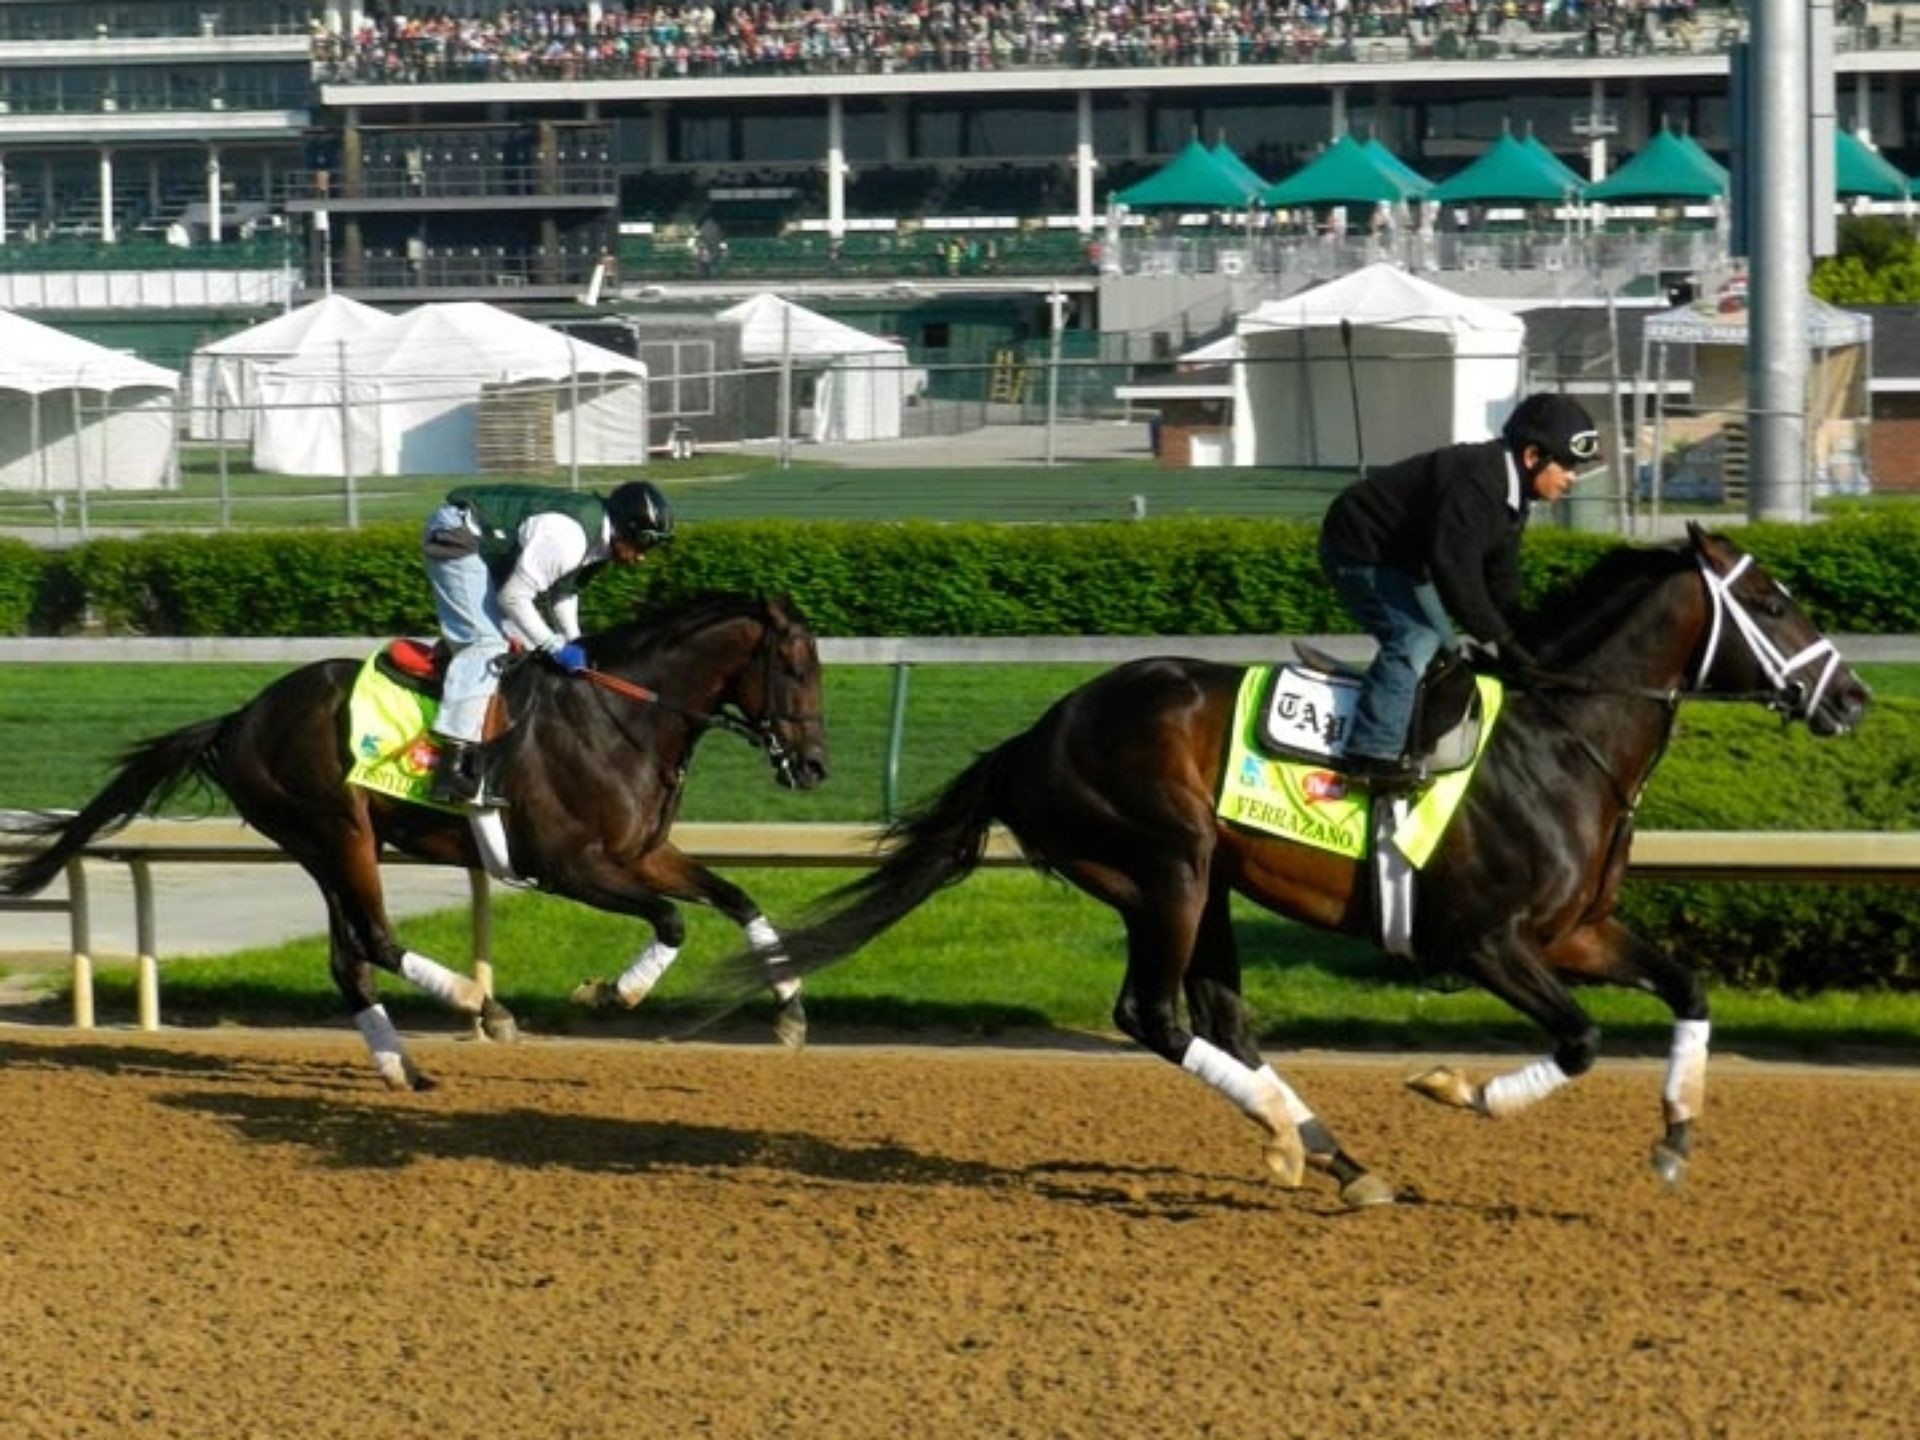 1920x1440 Unbeaten Verrazano (front) and Itsmyluckyday work out in preparation for  the Kentucky Derby.